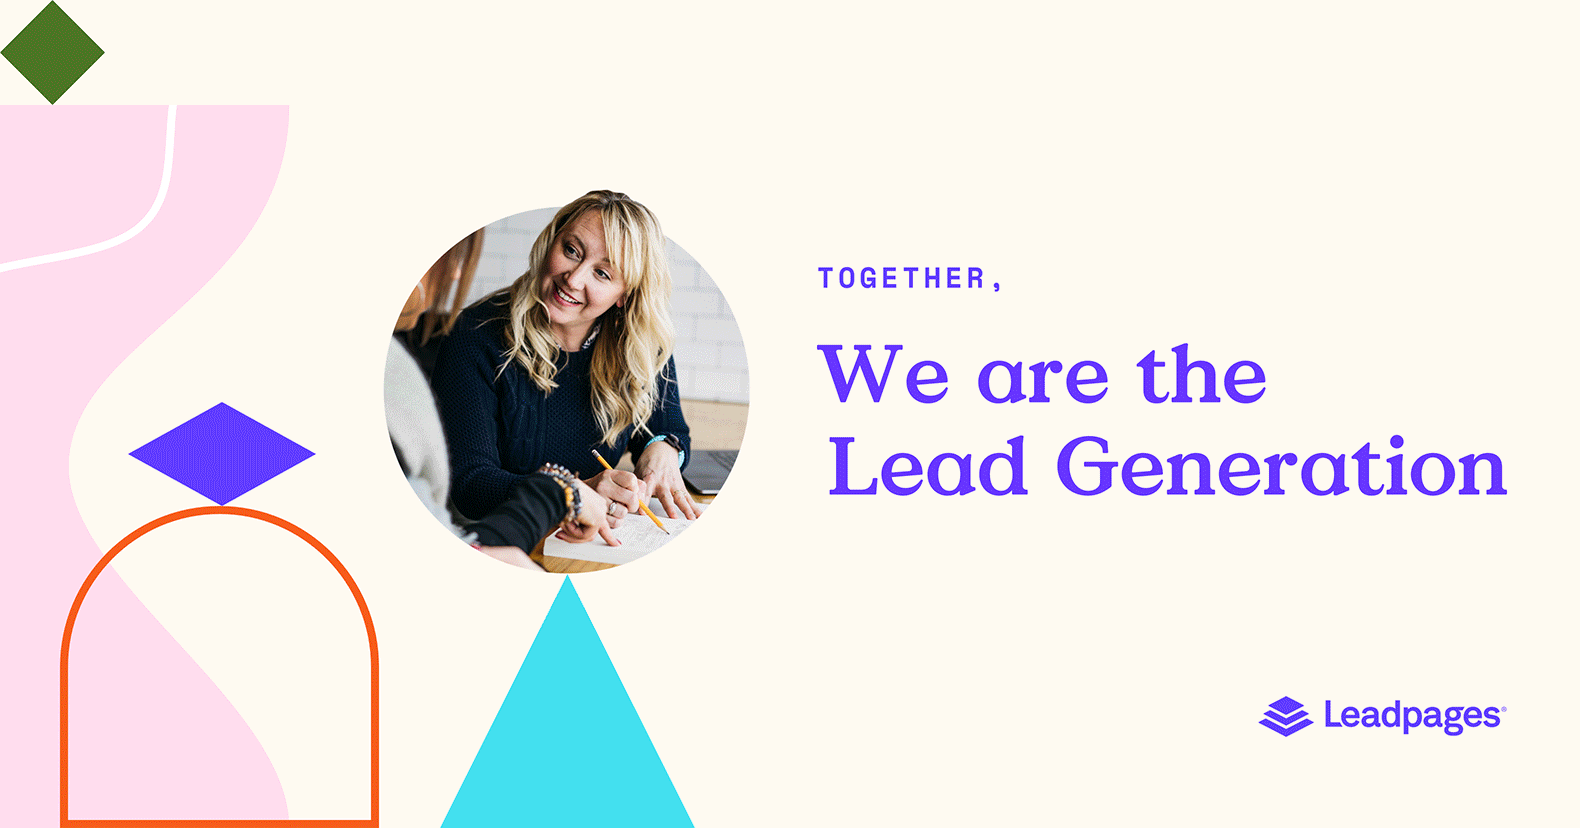 Together, we are the Lead Generation.